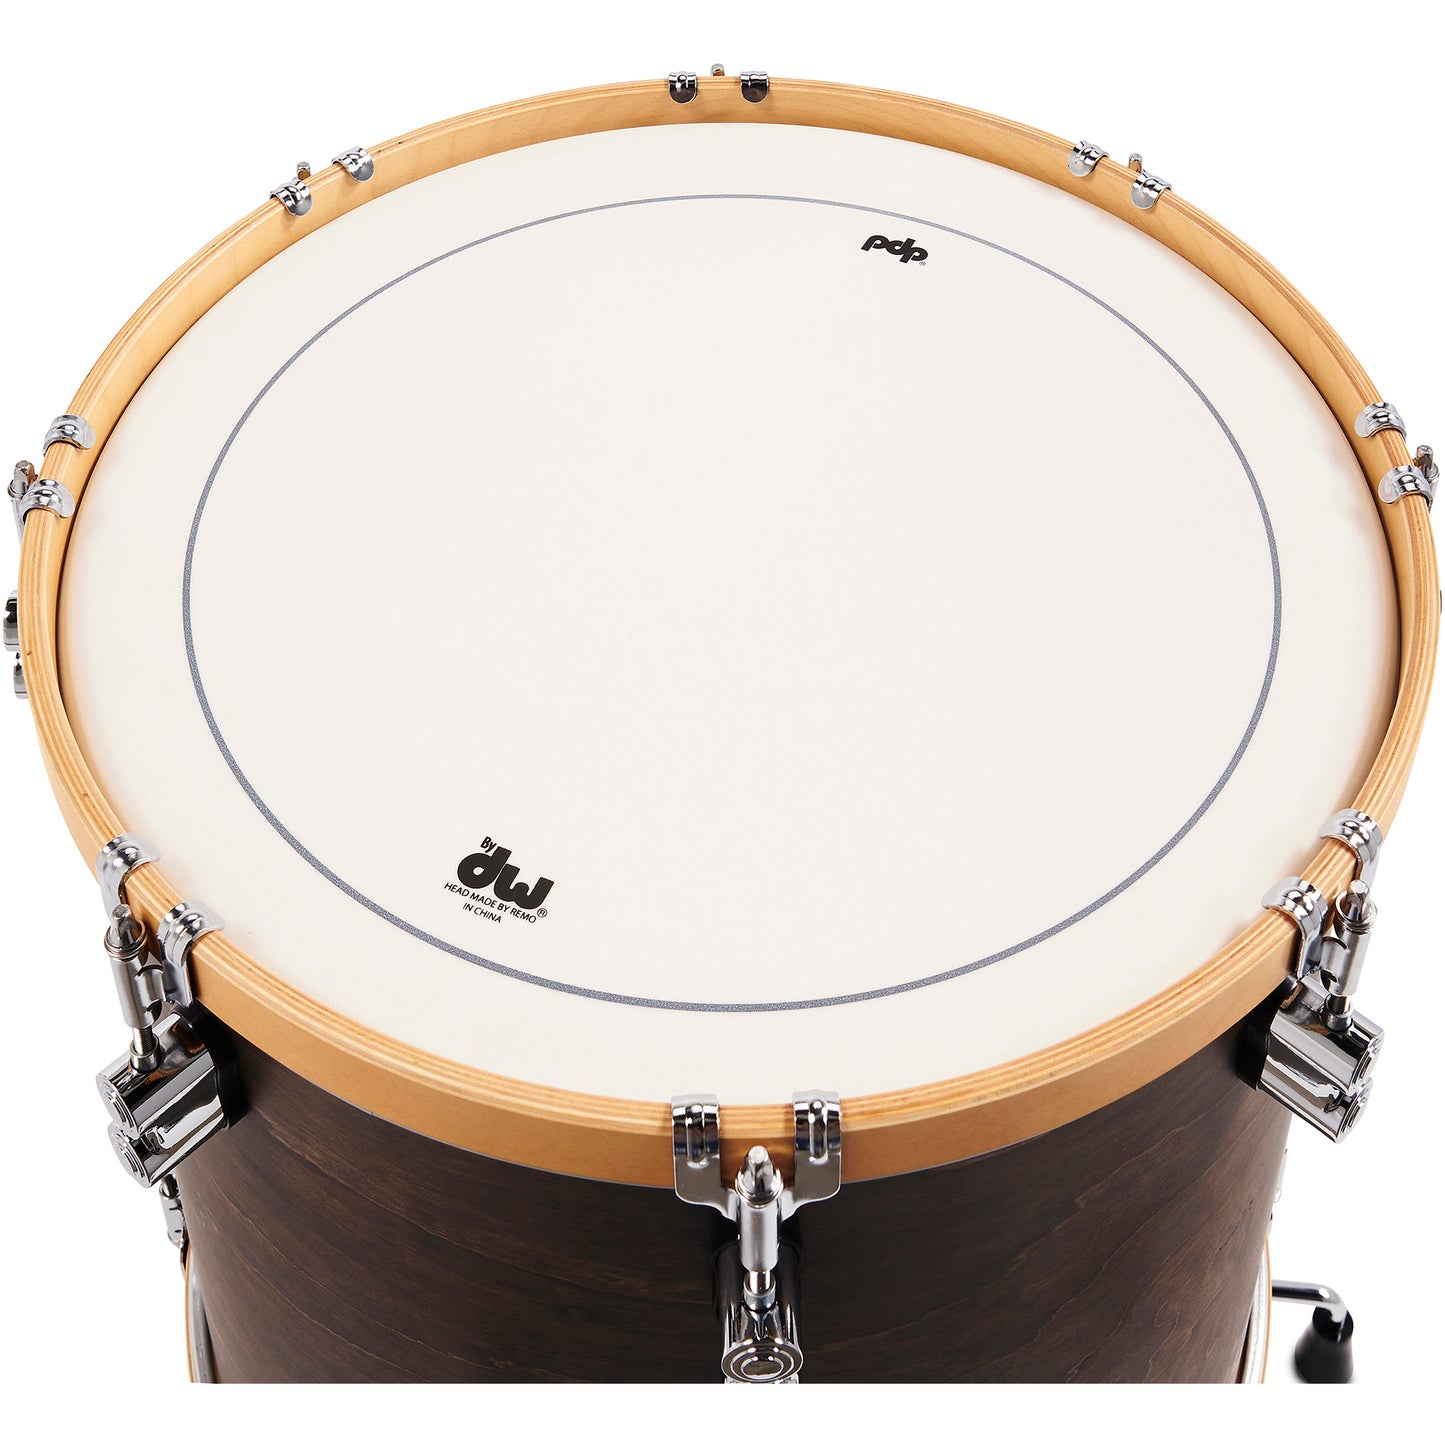 Pacific Drums & Percussion Concept Classic 3-Piece Shell Kit - Walnut